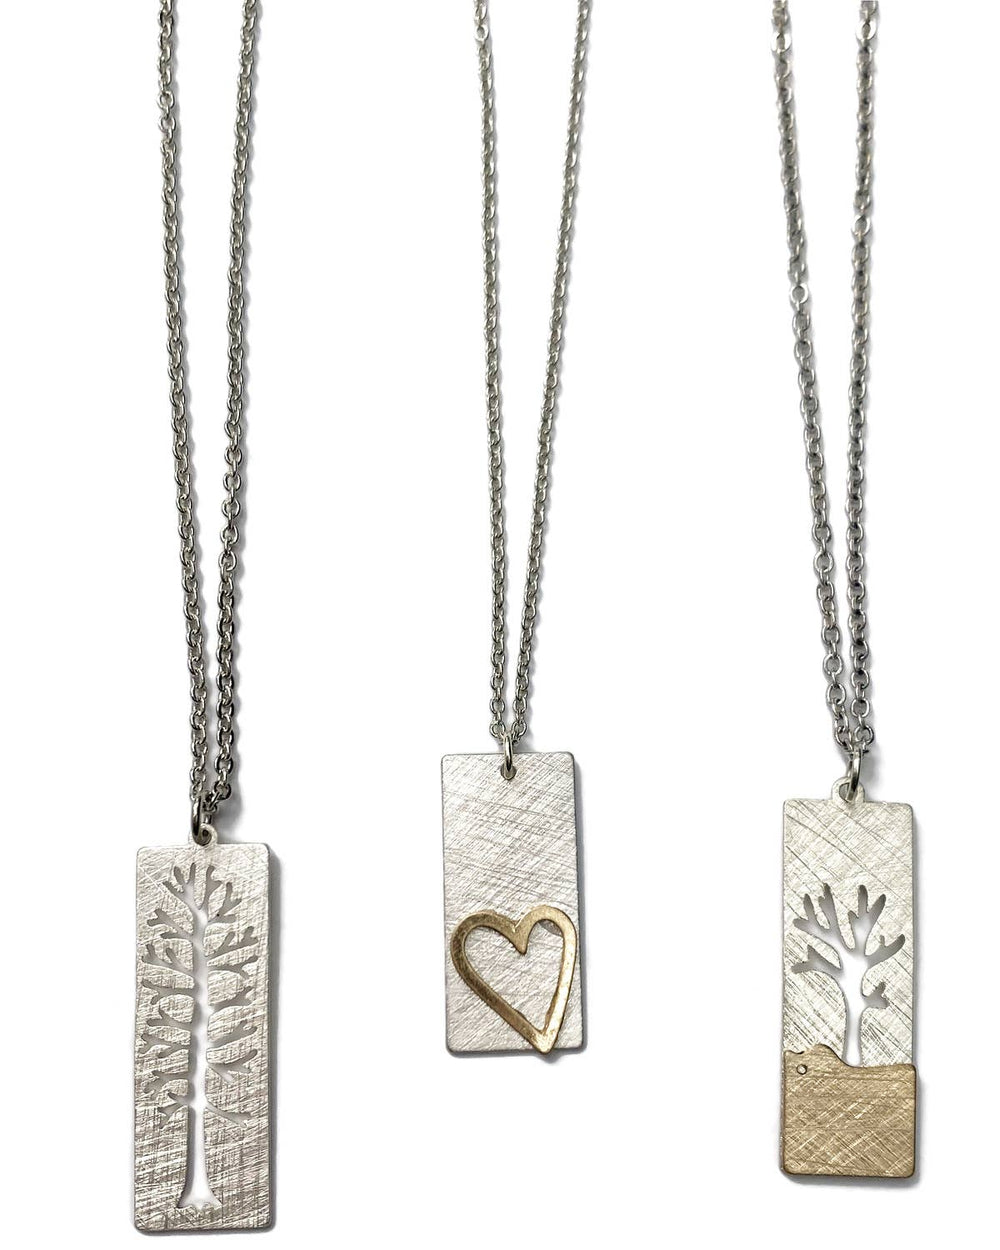 Matte Silver & Gold Nature Themed Charm Necklaces